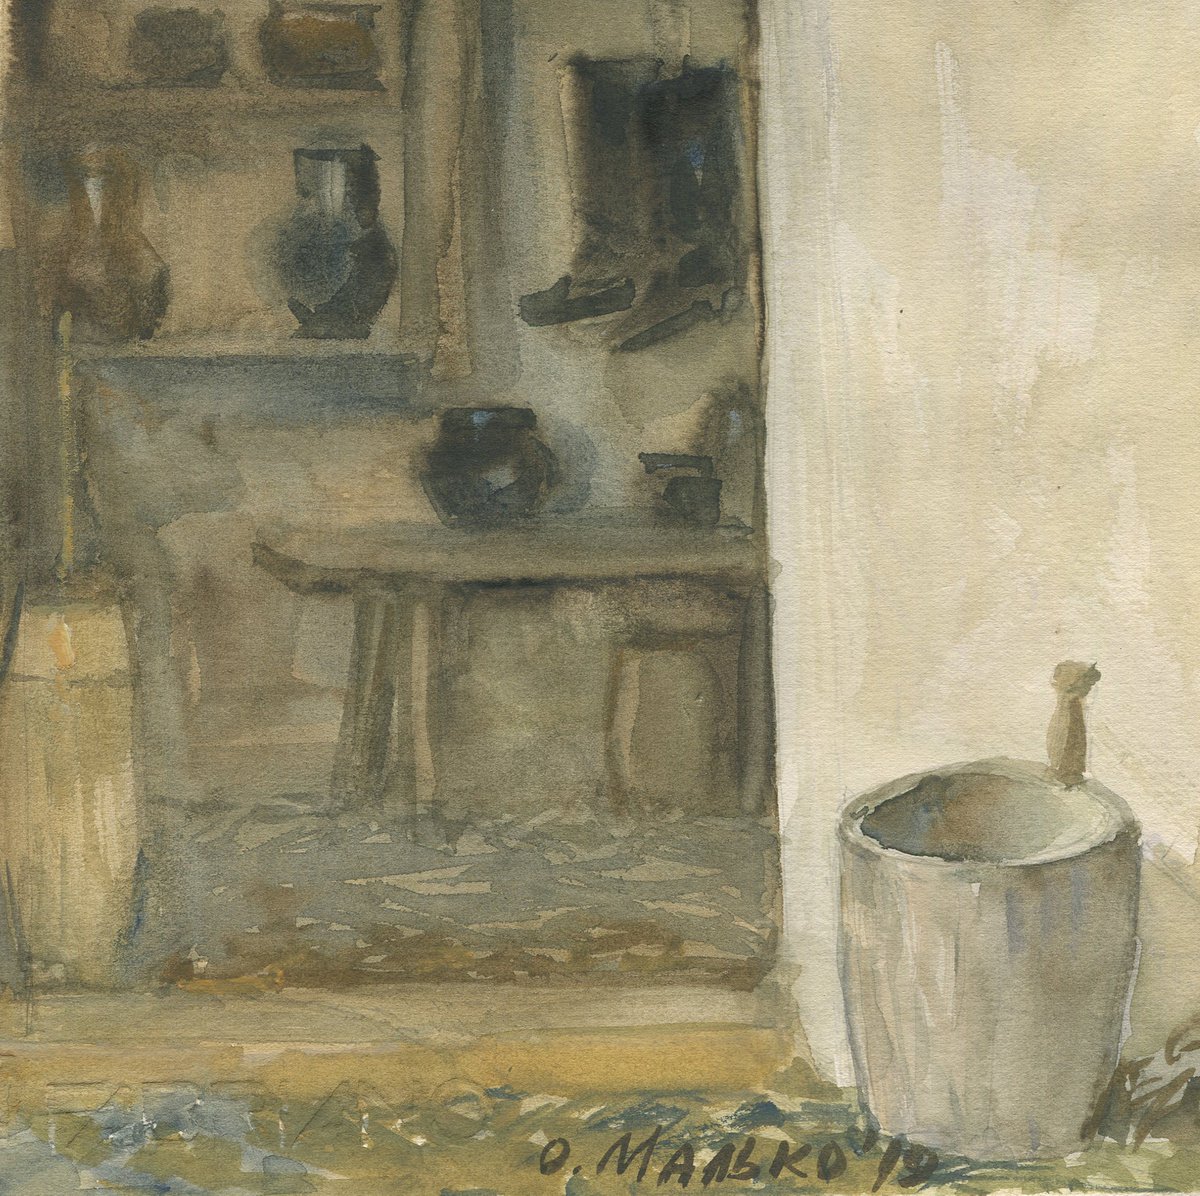 The pantry room (At the museum) / Old house interior Small size watercolor Original painti... by Olha Malko